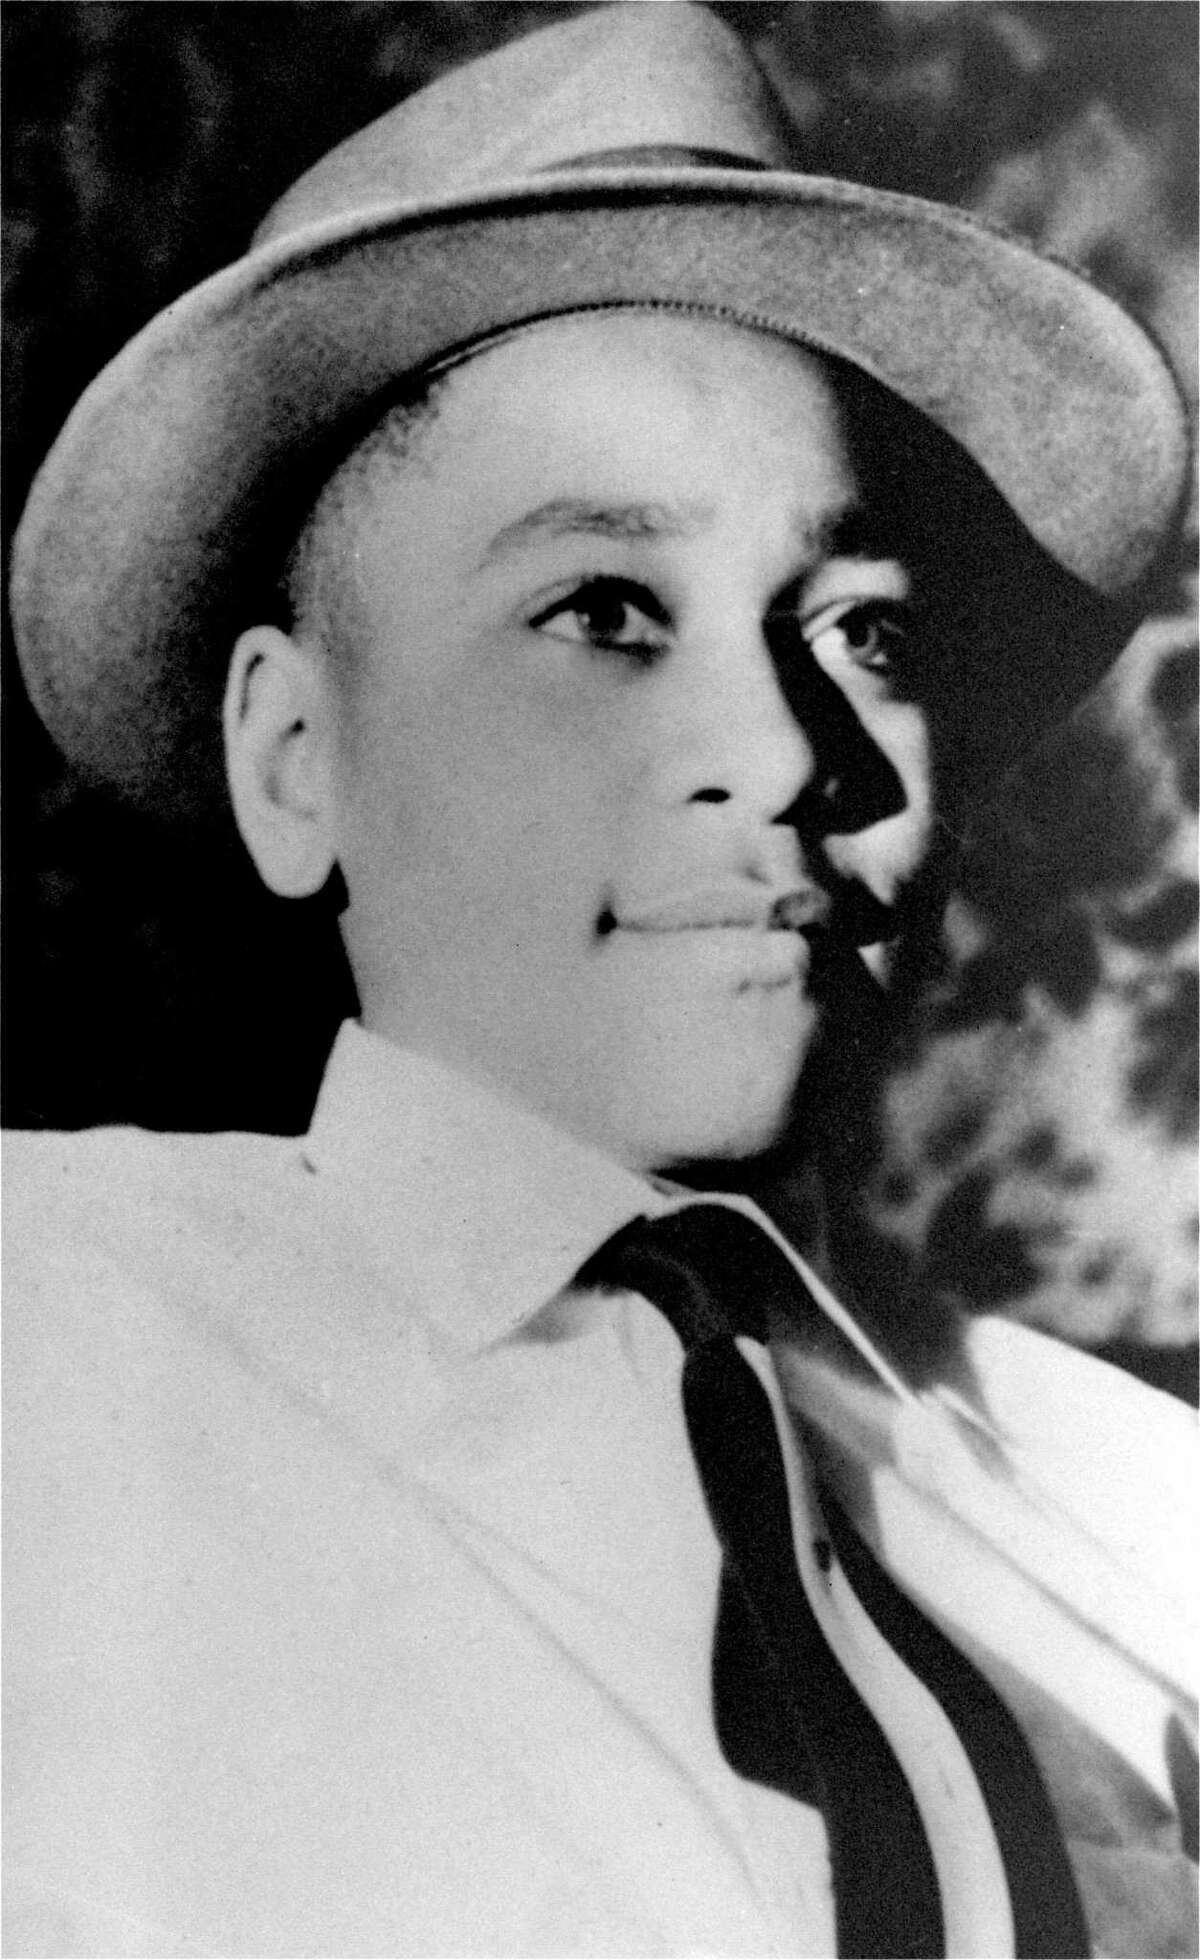 Emmett Louis Till was murdered in 1955 for allegedly whistling at Carolyn Bryant. Thanks to two new revelations, the ghost of Emmett Till has returned to our collective awareness.